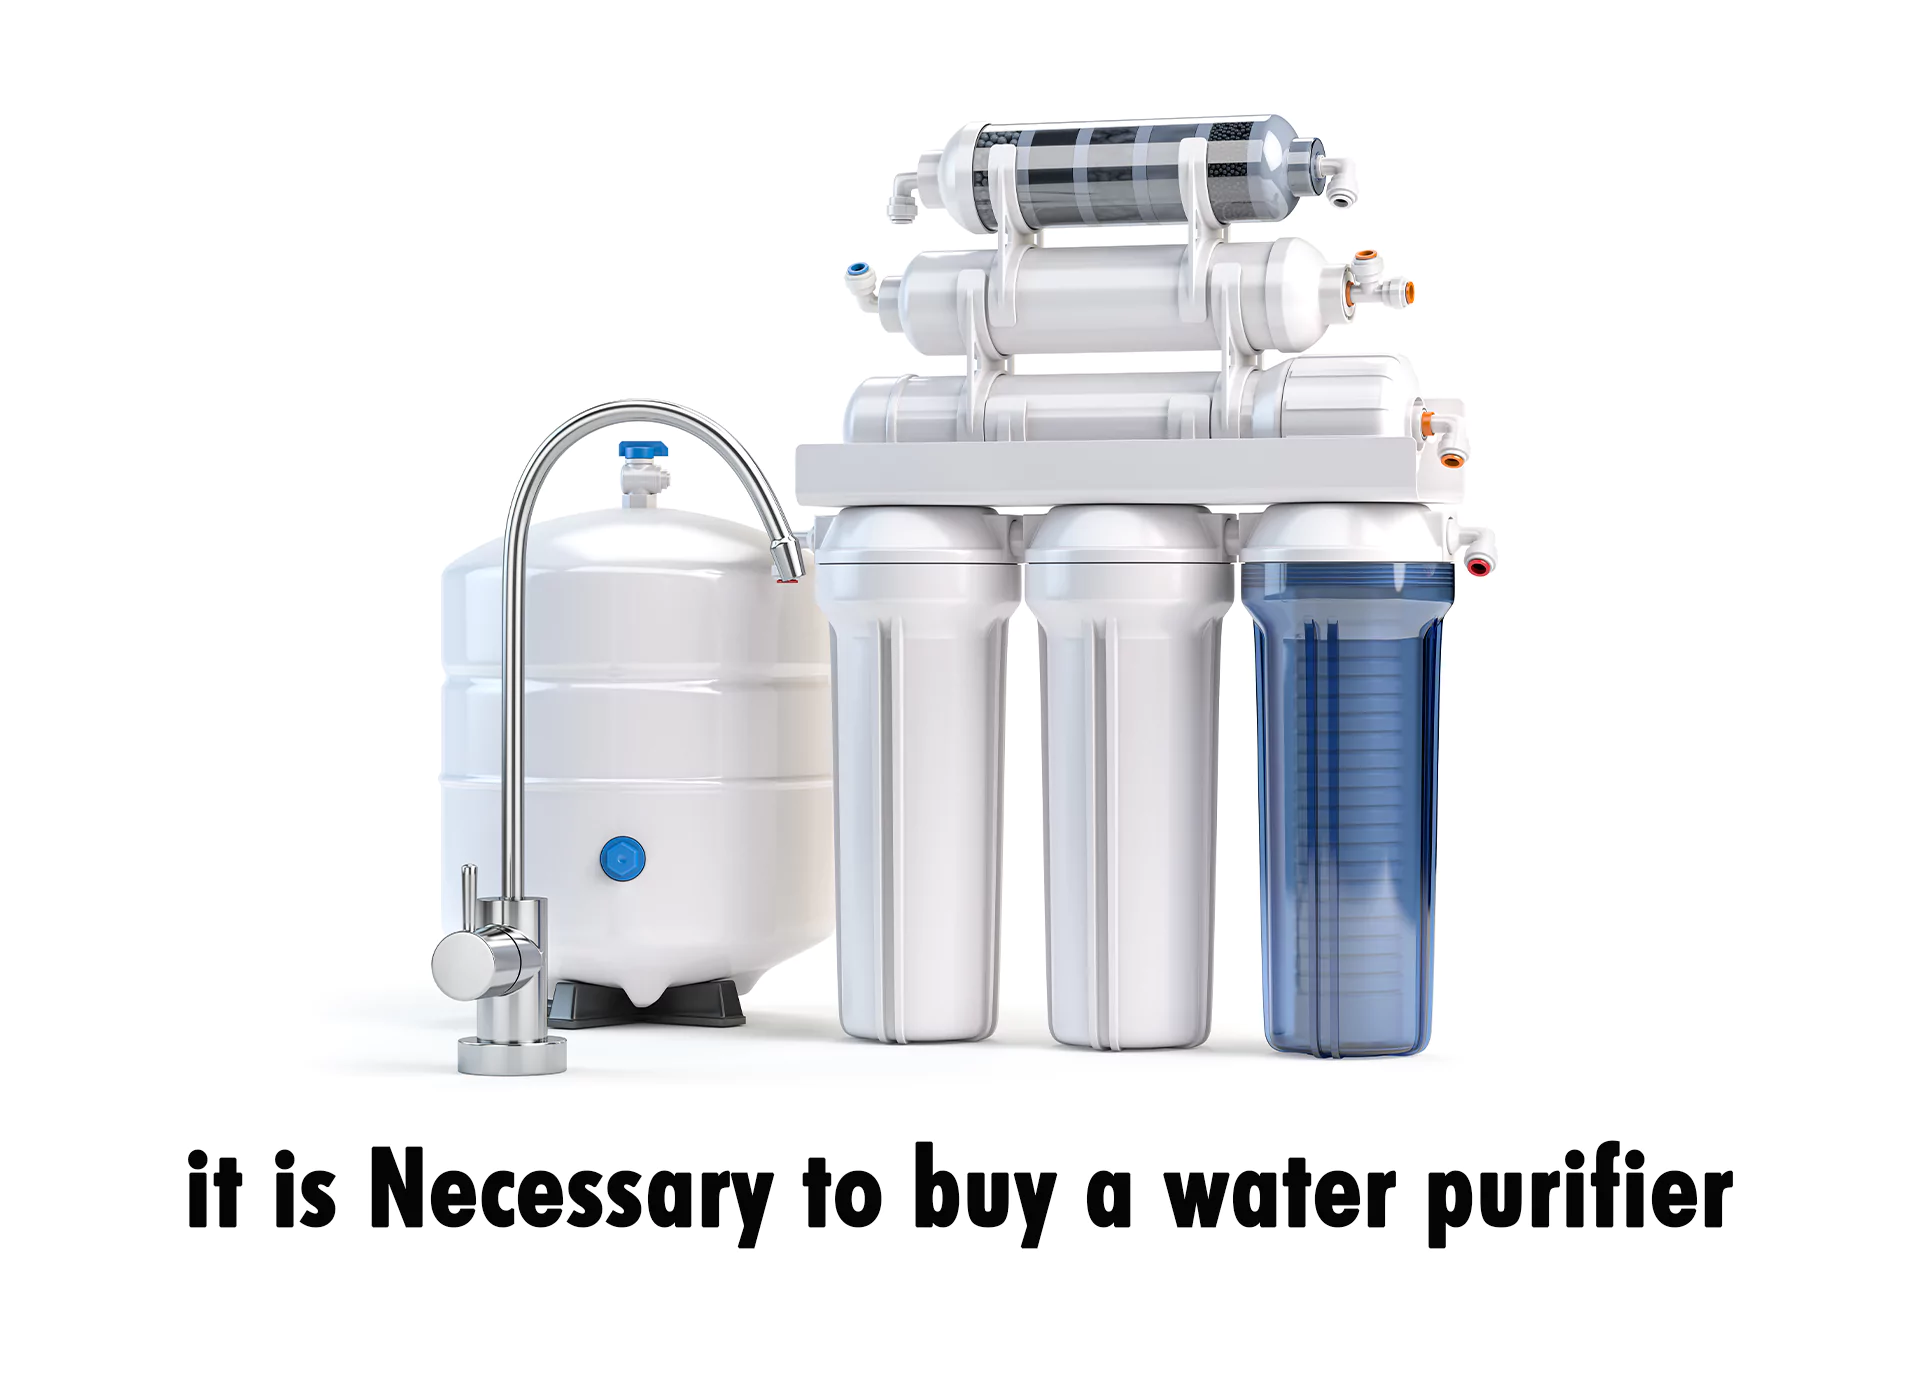 Why is it Necessary to buy a water purifier